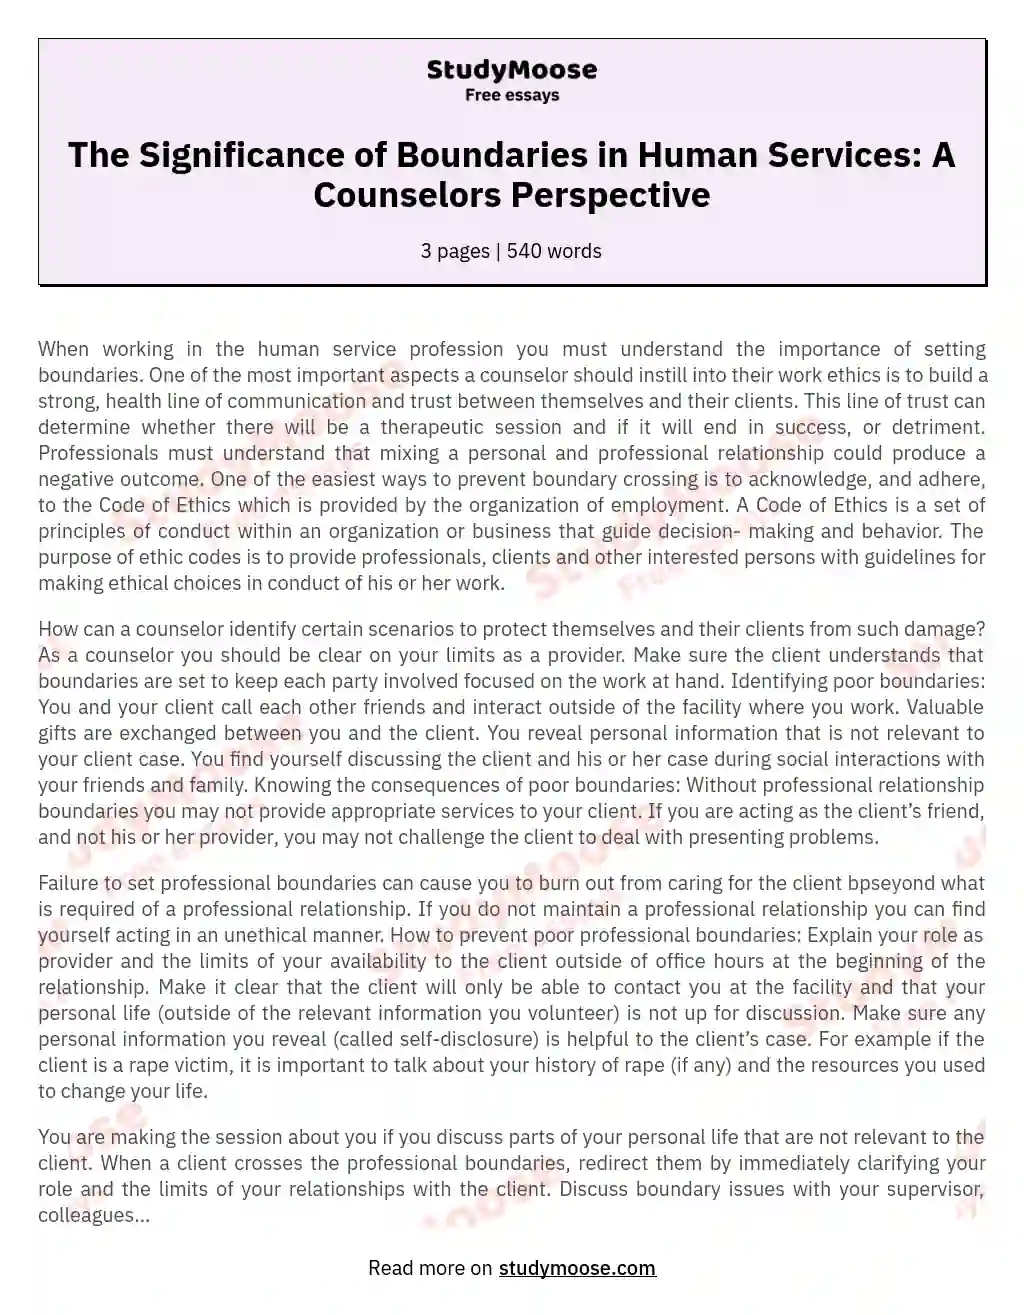 The Significance of Boundaries in Human Services: A Counselors Perspective